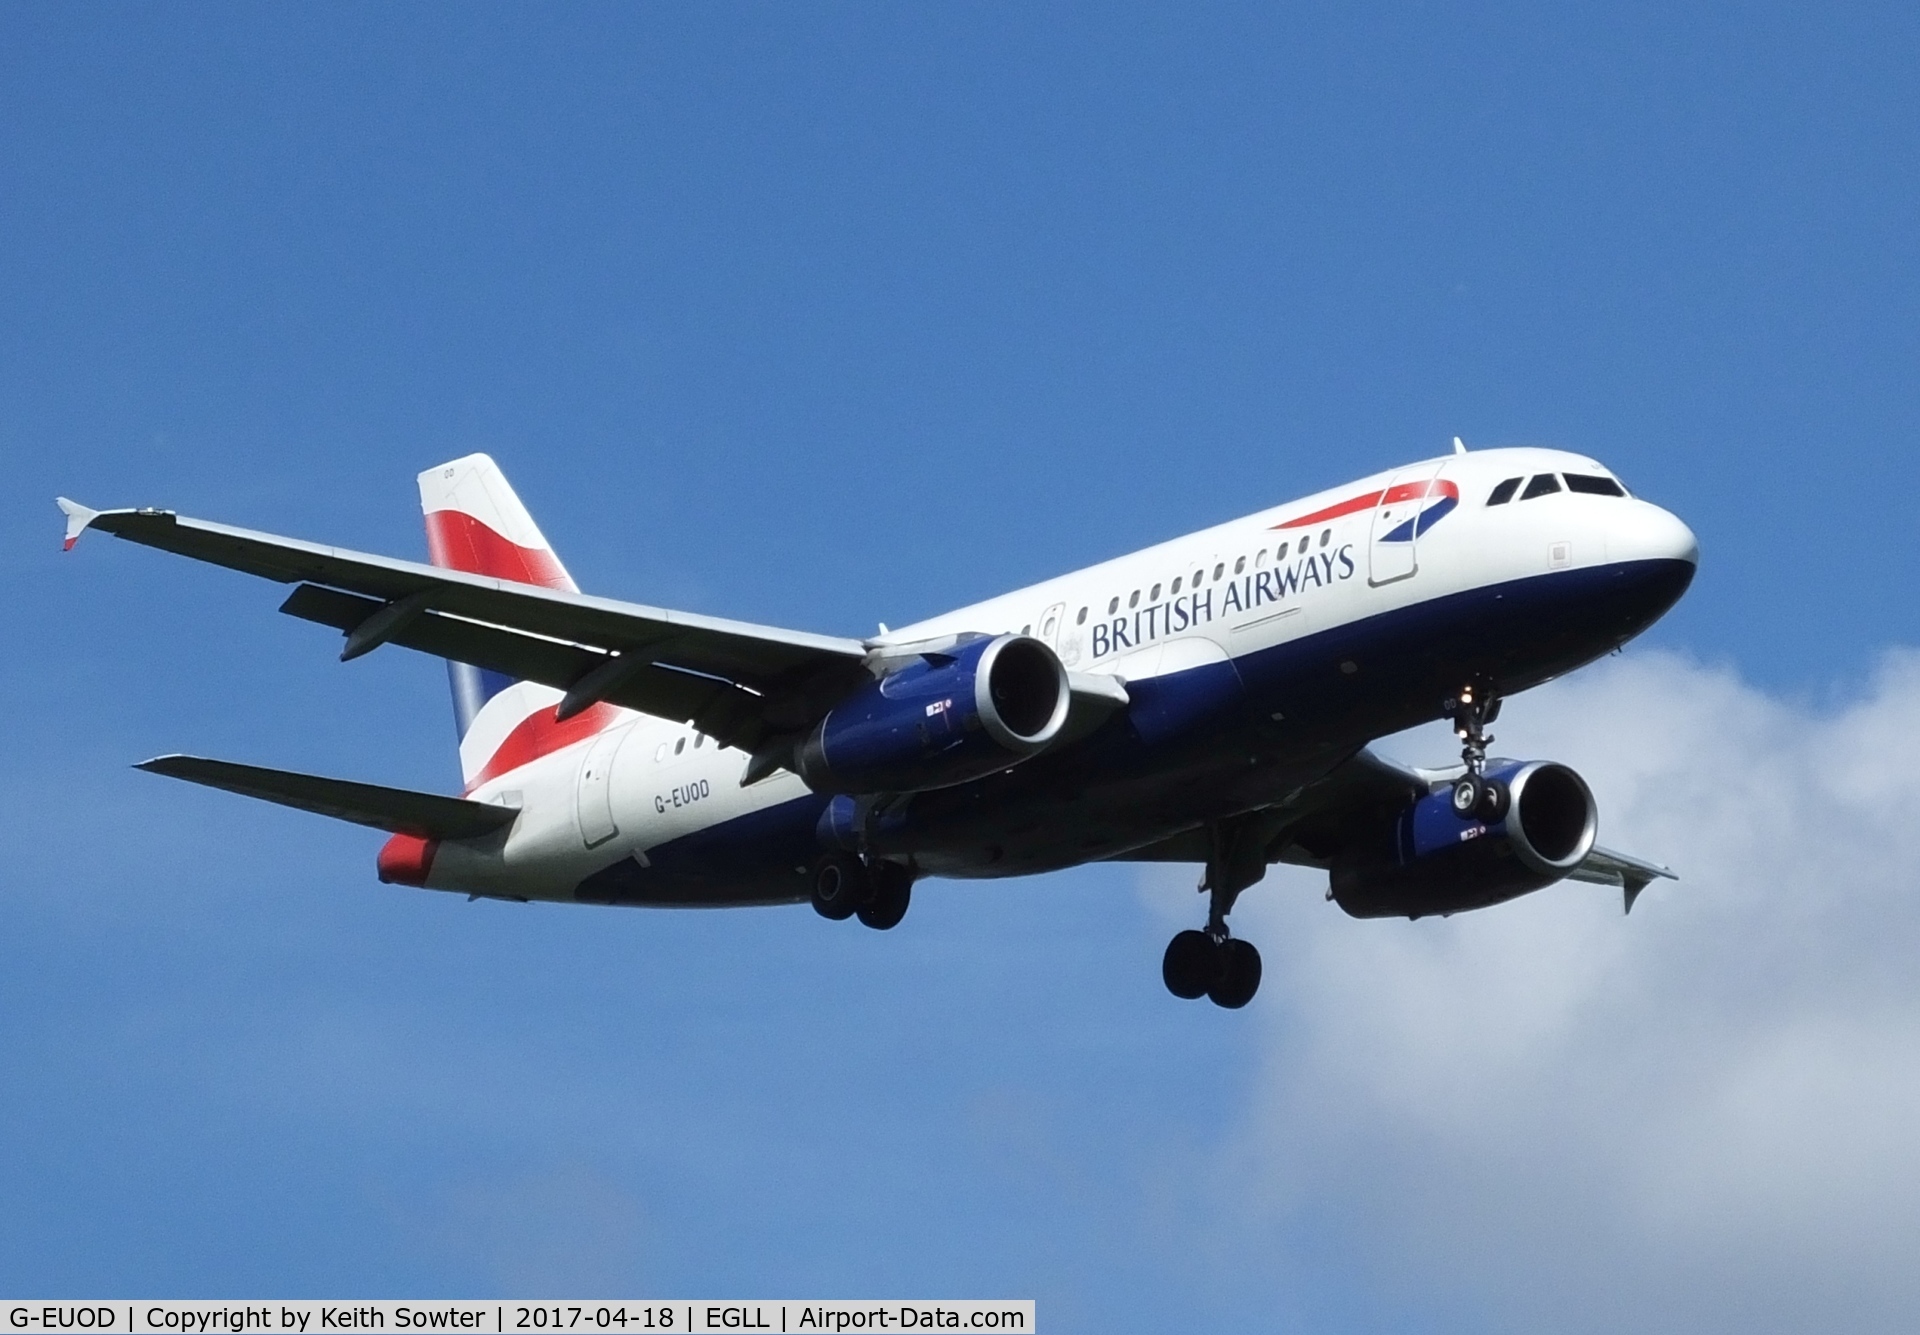 G-EUOD, 2001 Airbus A319-131 C/N 1558, Short finals to land on runway 09L at Heathrow